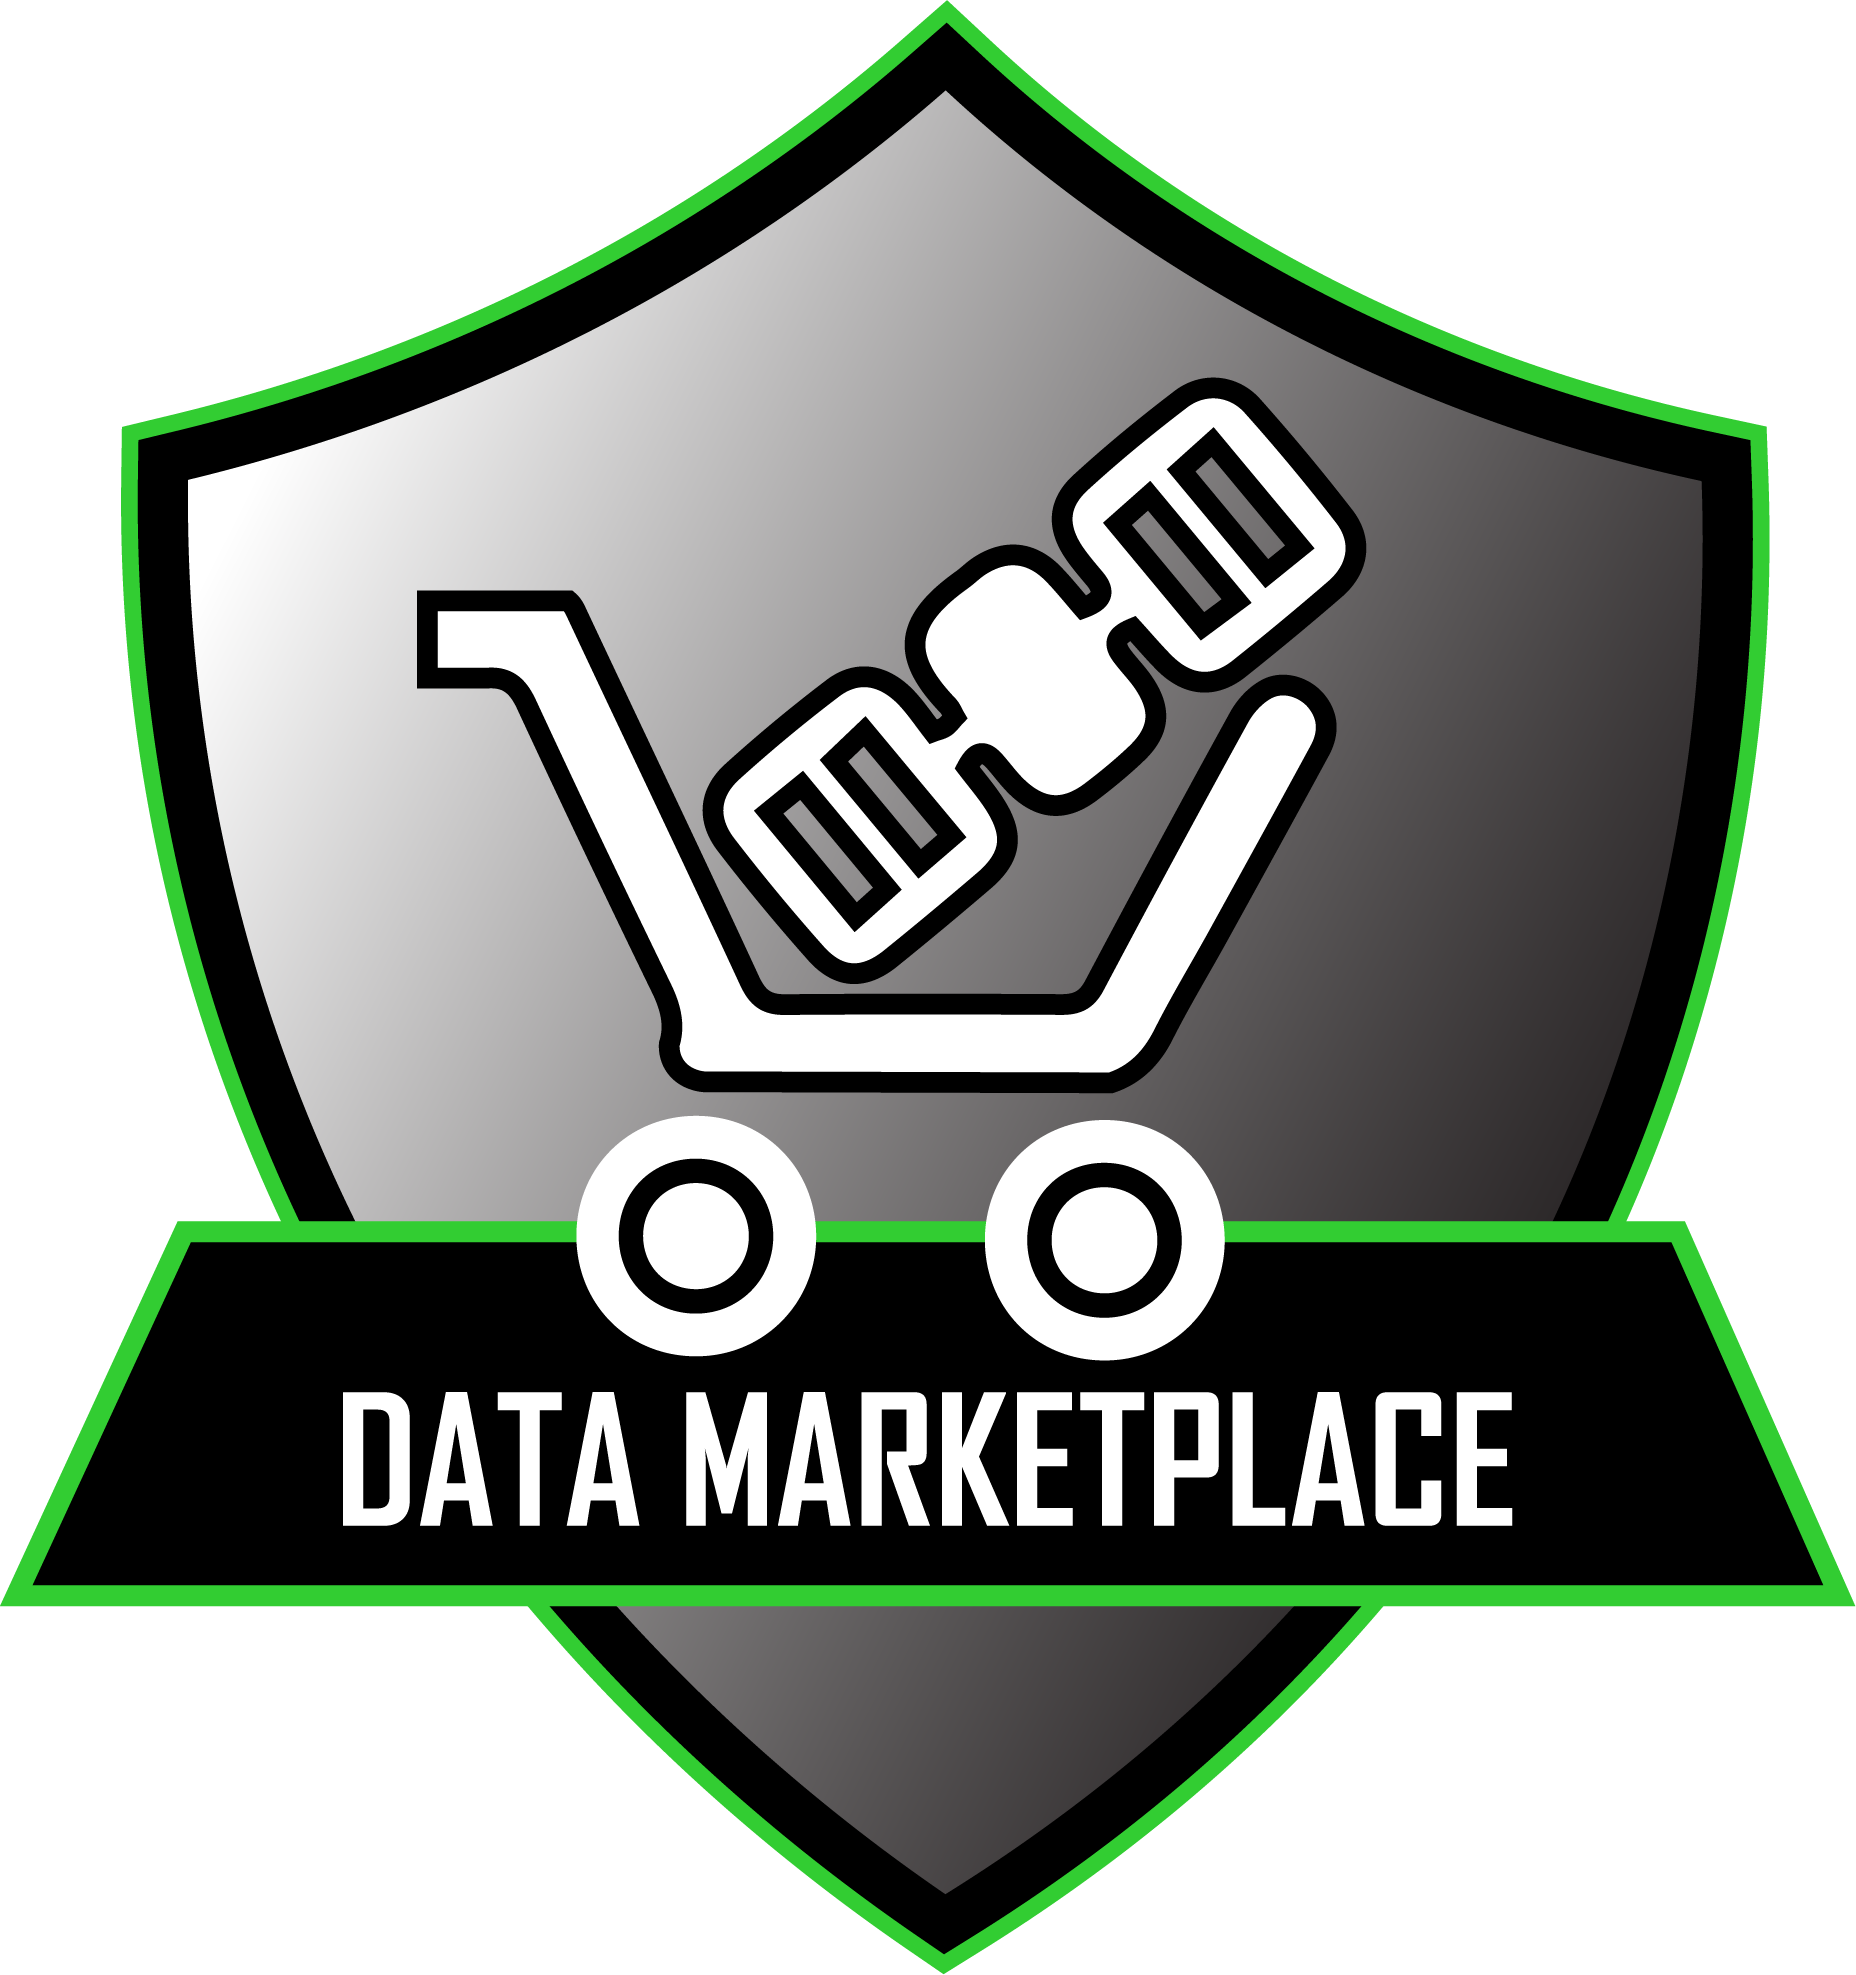 Data Marketplace icon - Shield with cart on it